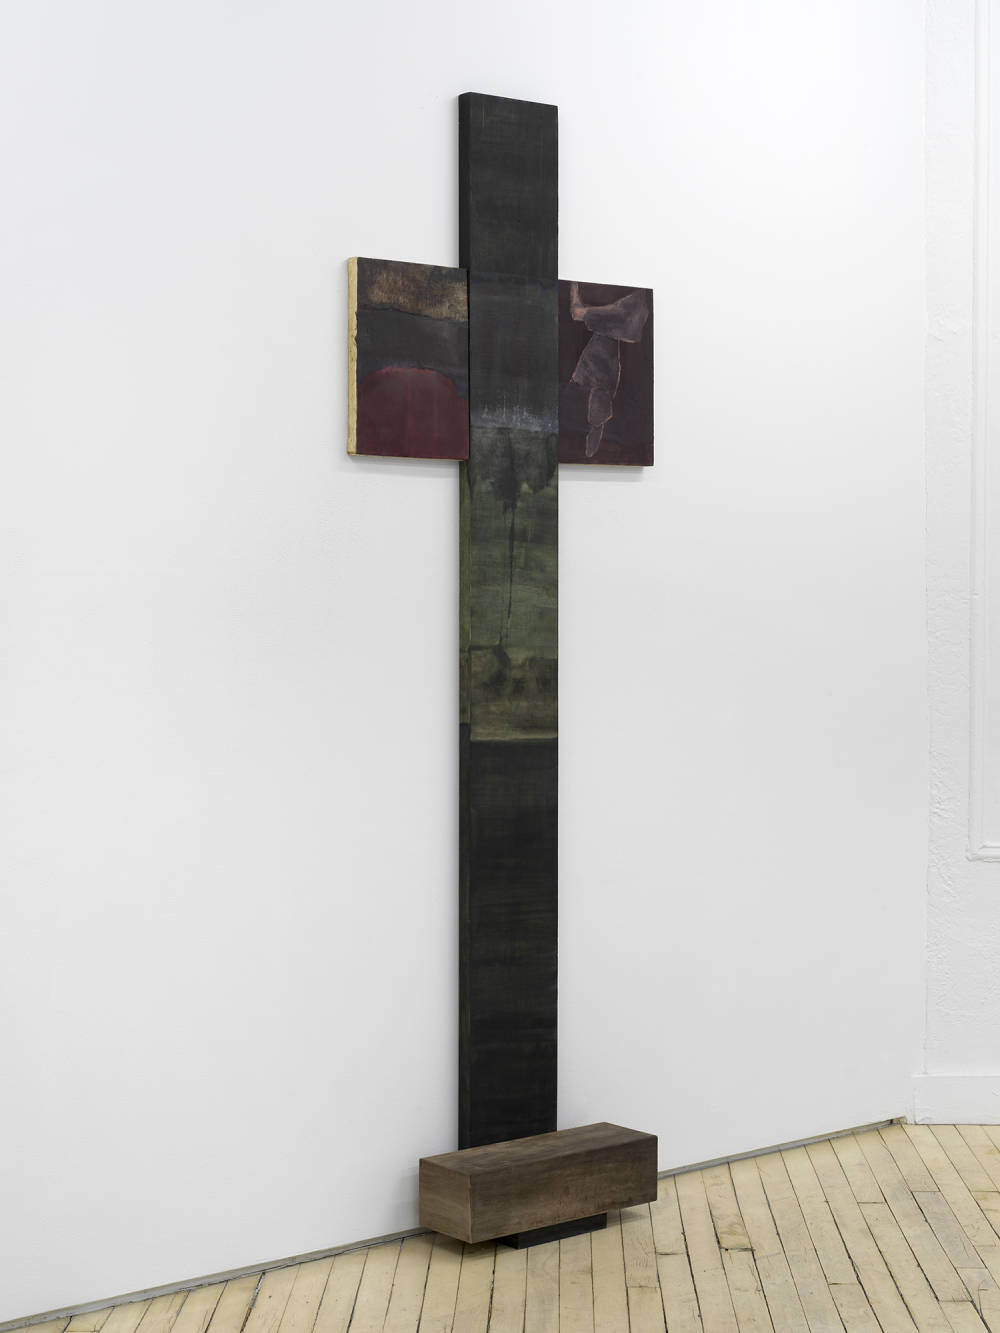 A vertical painting and sculpture in the shape of a cross leaning against a gallery wall. 